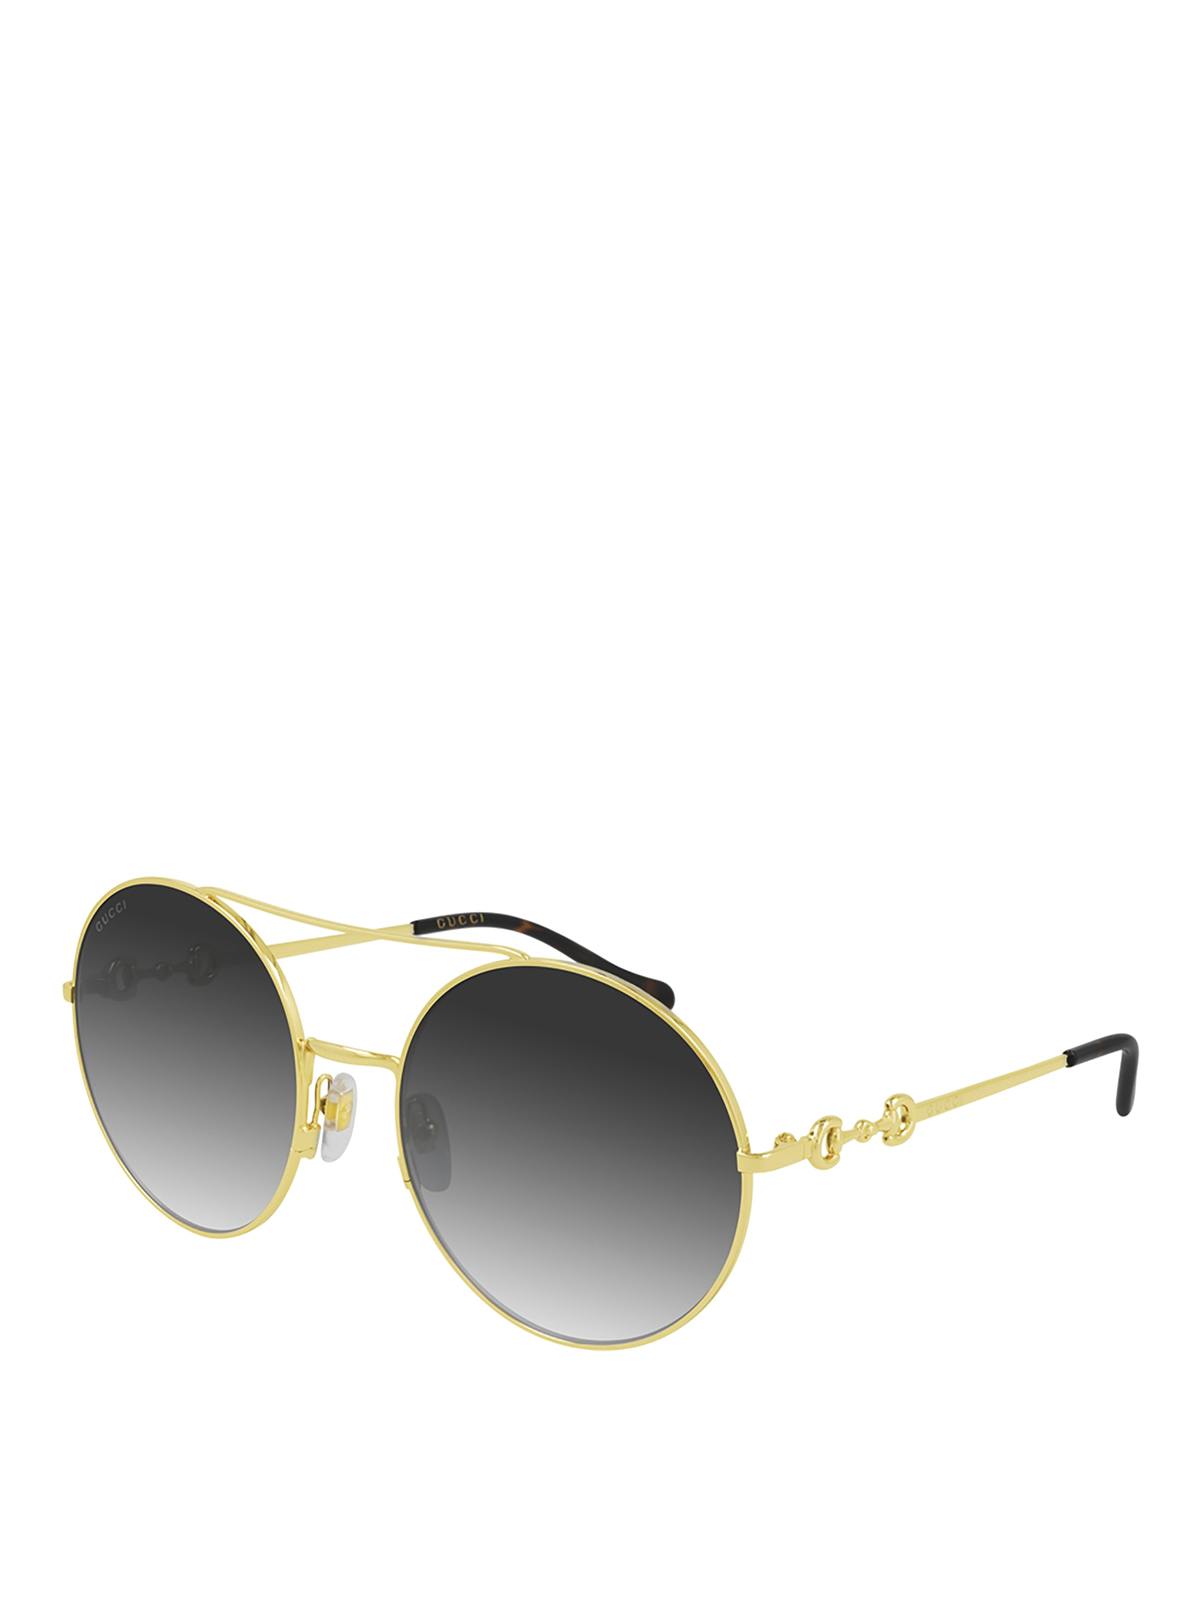 Gucci Rounded Sunglasses In Gold